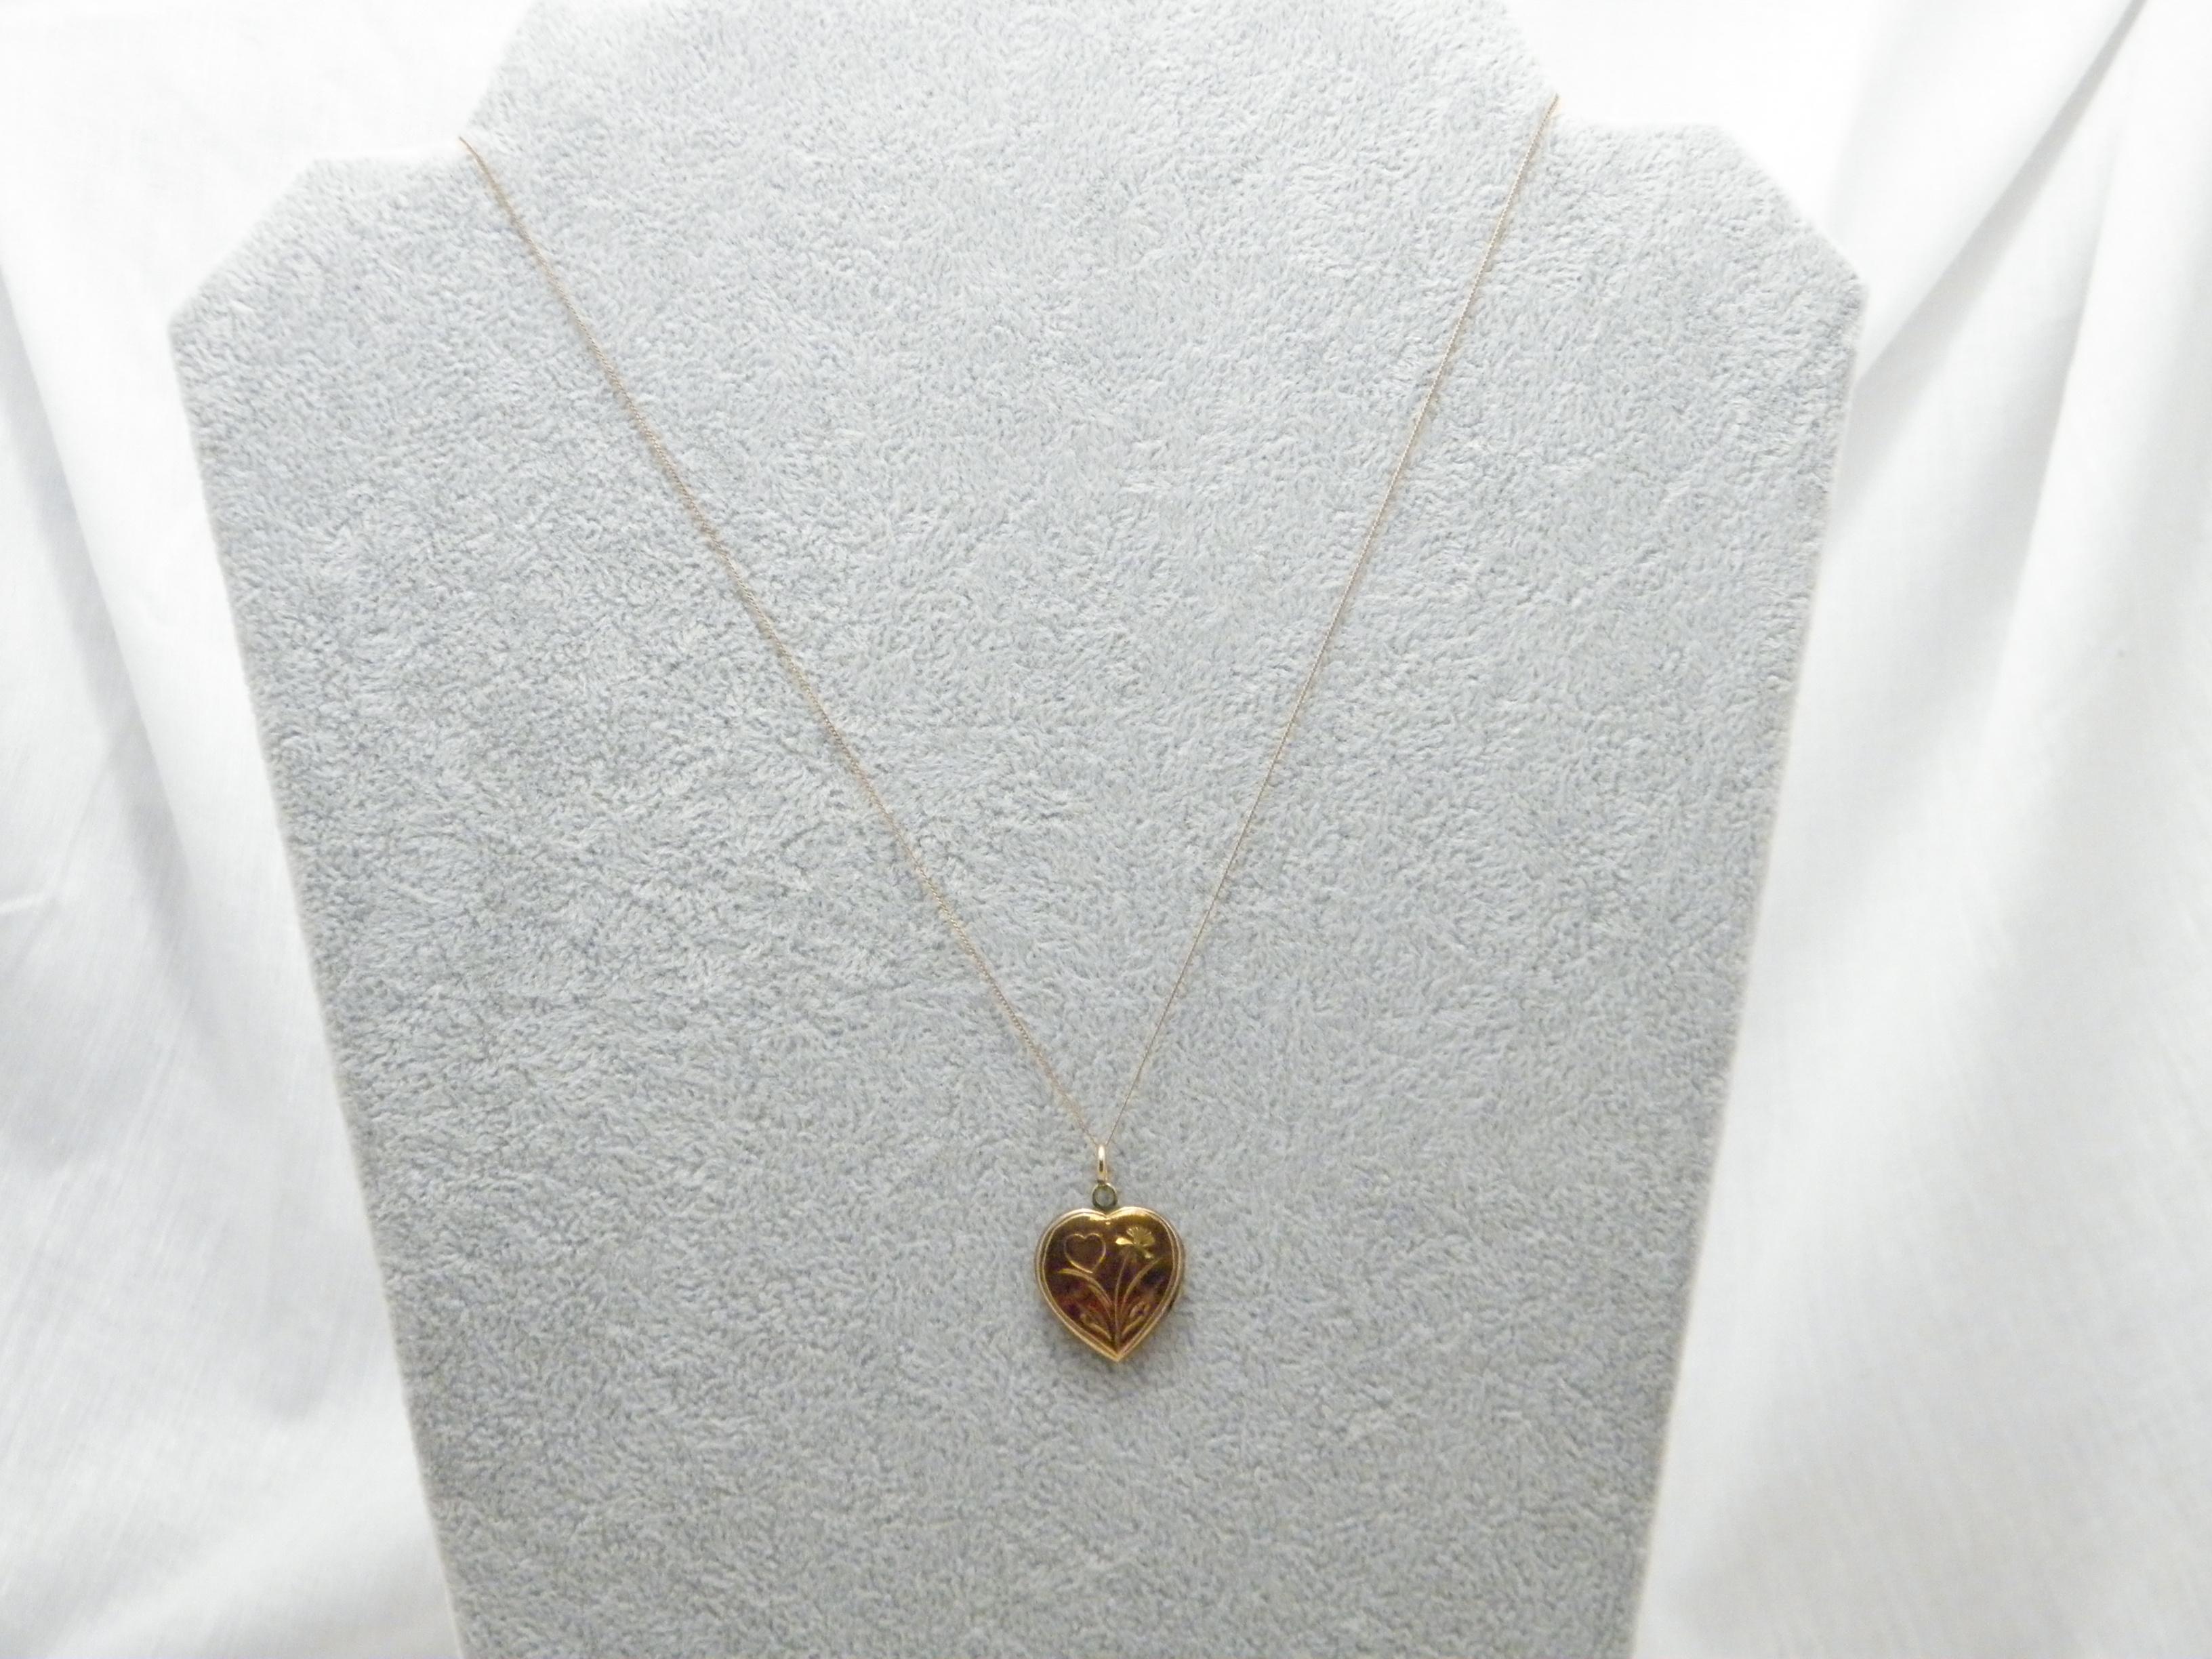 Antique 14ct Rose Gold Heart Locket Pendant Necklace Curb Chain 585 375 18 Inch For Sale 3